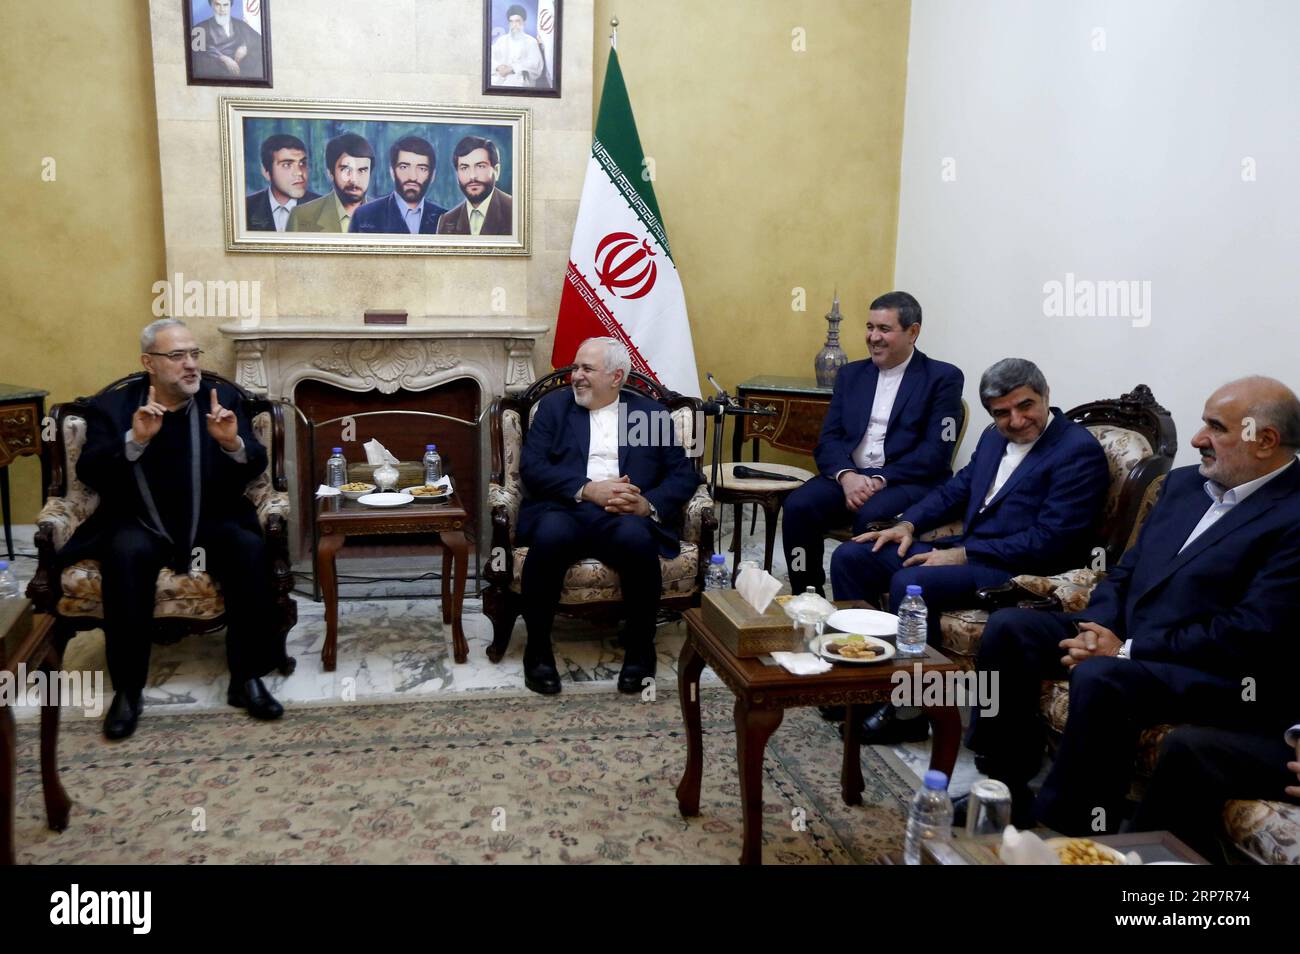 (190210) -- BEIRUT, Feb. 10, 2019 -- Iranian Foreign Minister Mohammad Javad Zarif (2nd L) meets with Lebanese officials in the Iranian Embassy in Beirut, Lebanon, on Feb. 10, 2019. Zarif arrived in Lebanon on Sunday for a two-day official visit to meet with Lebanese officials and informed them about Iran s readiness to help Lebanon on all levels. ) LEBANON-BEIRUT-IRAN-FM-VISIT BilalxJawich PUBLICATIONxNOTxINxCHN Stock Photo